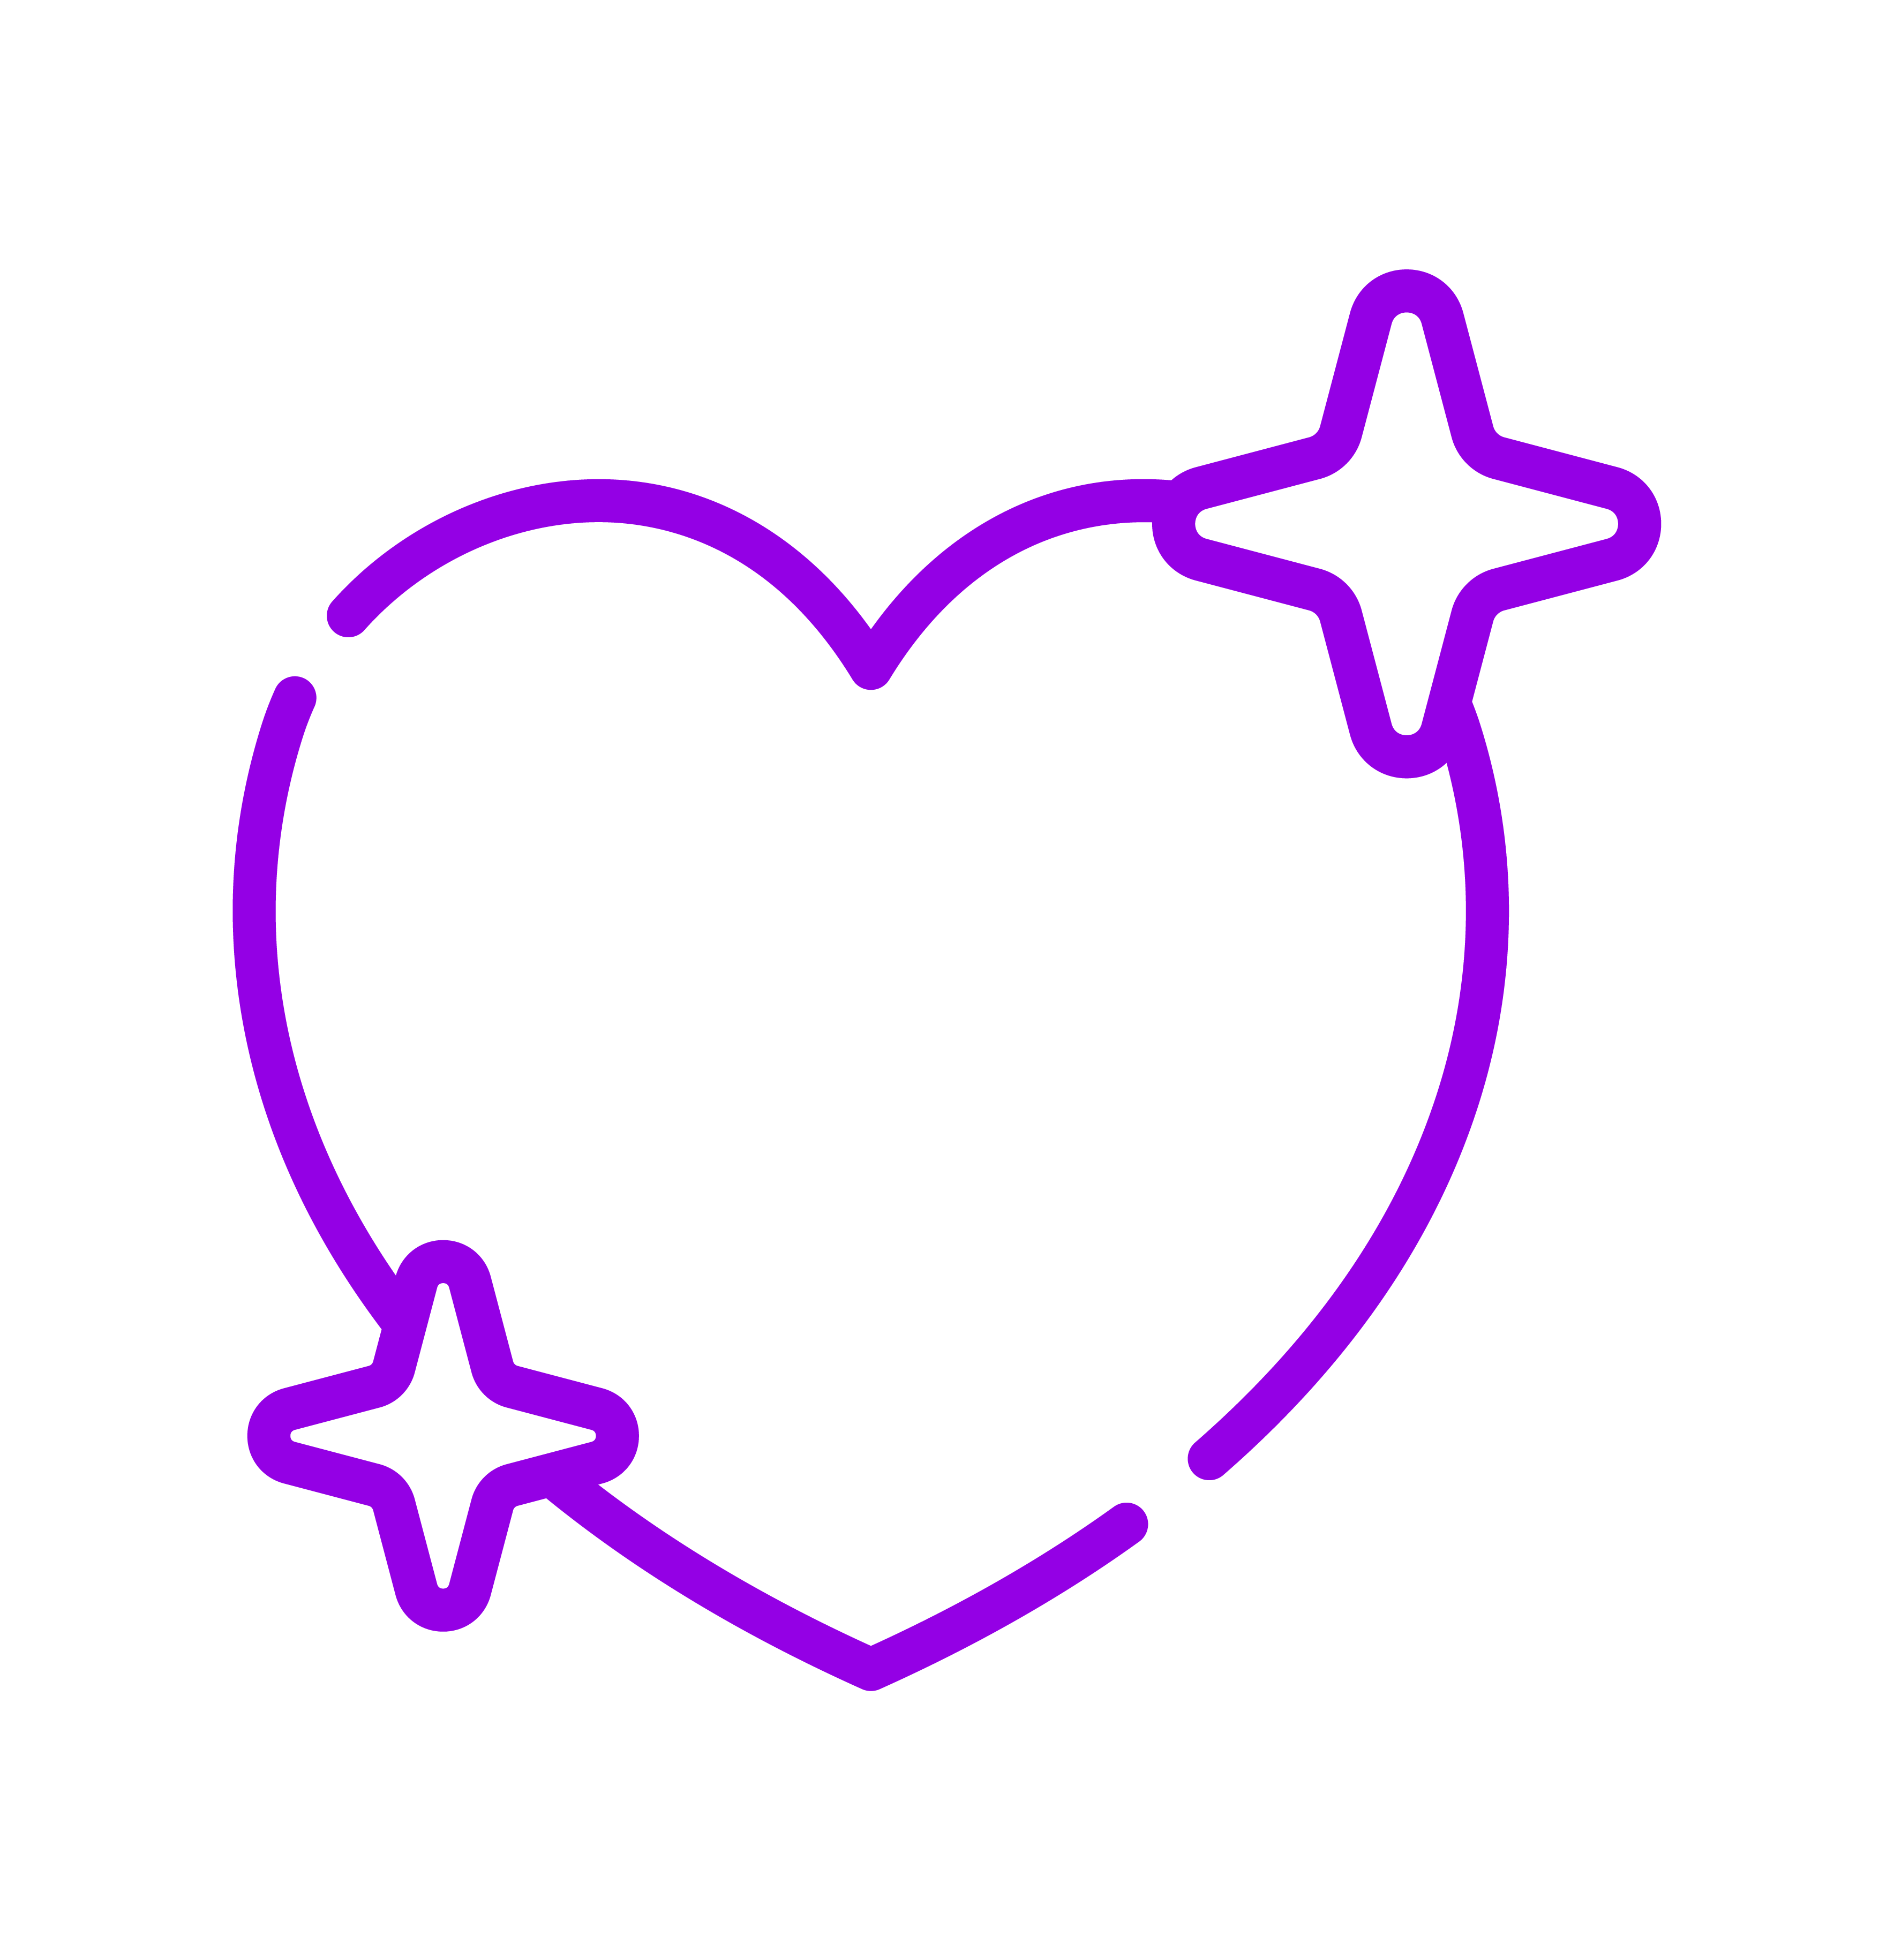 A purple heart with stars on a transparent background.